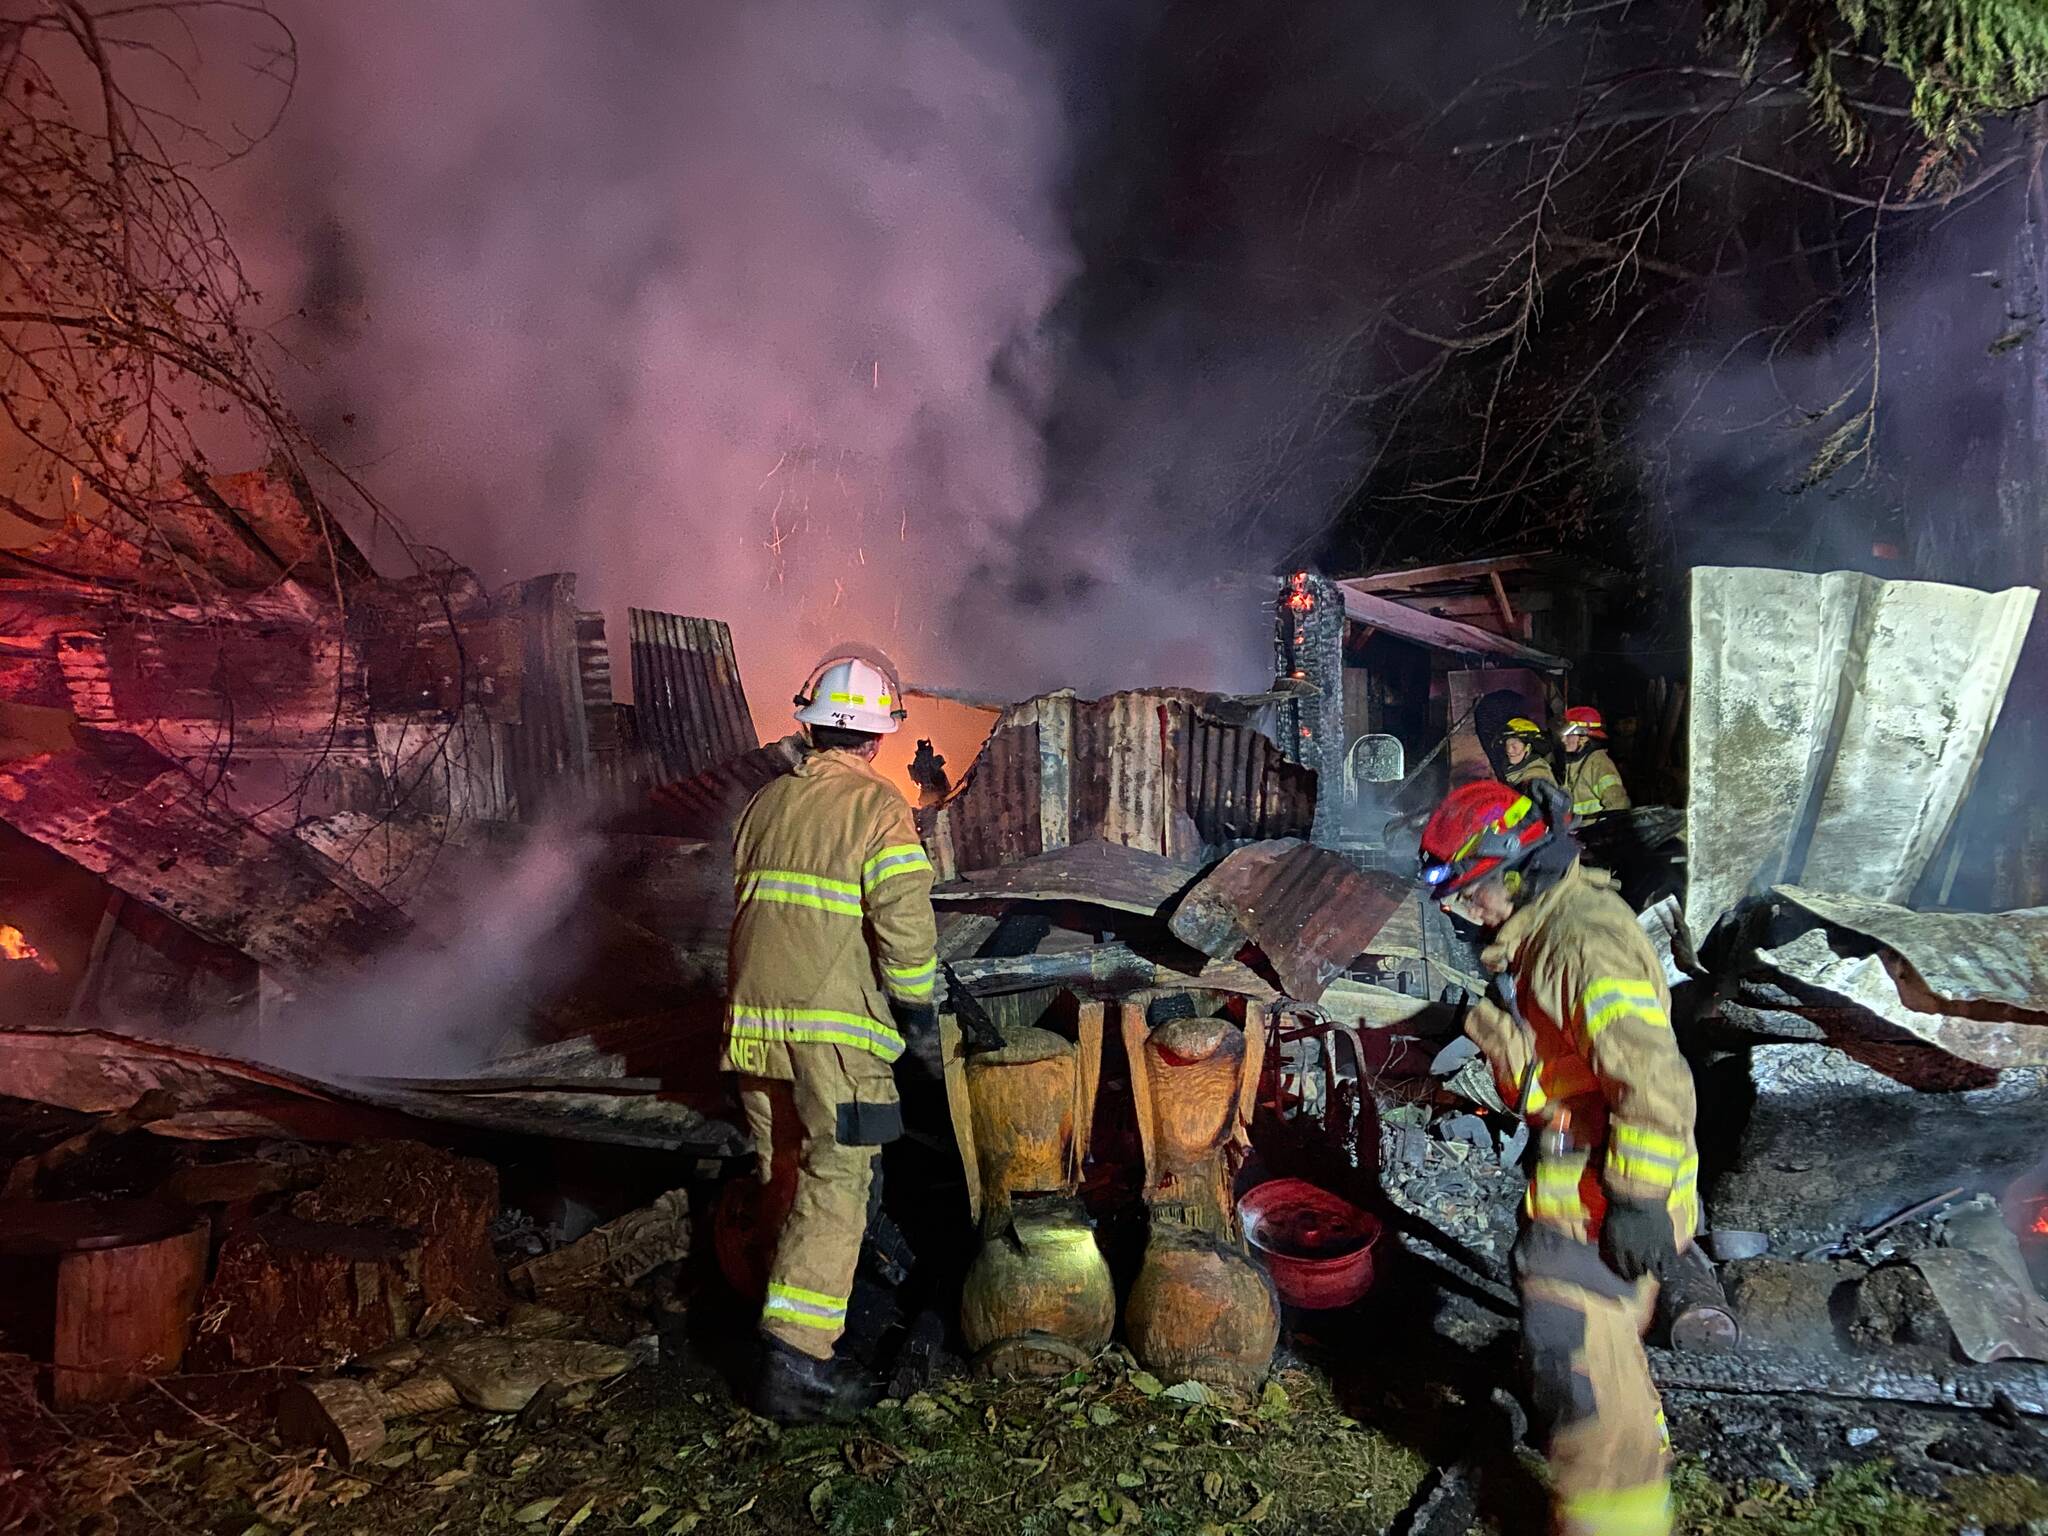 Photo provided
Firefighters battled a blaze early Friday morning at a burning South Whidbey workshop.